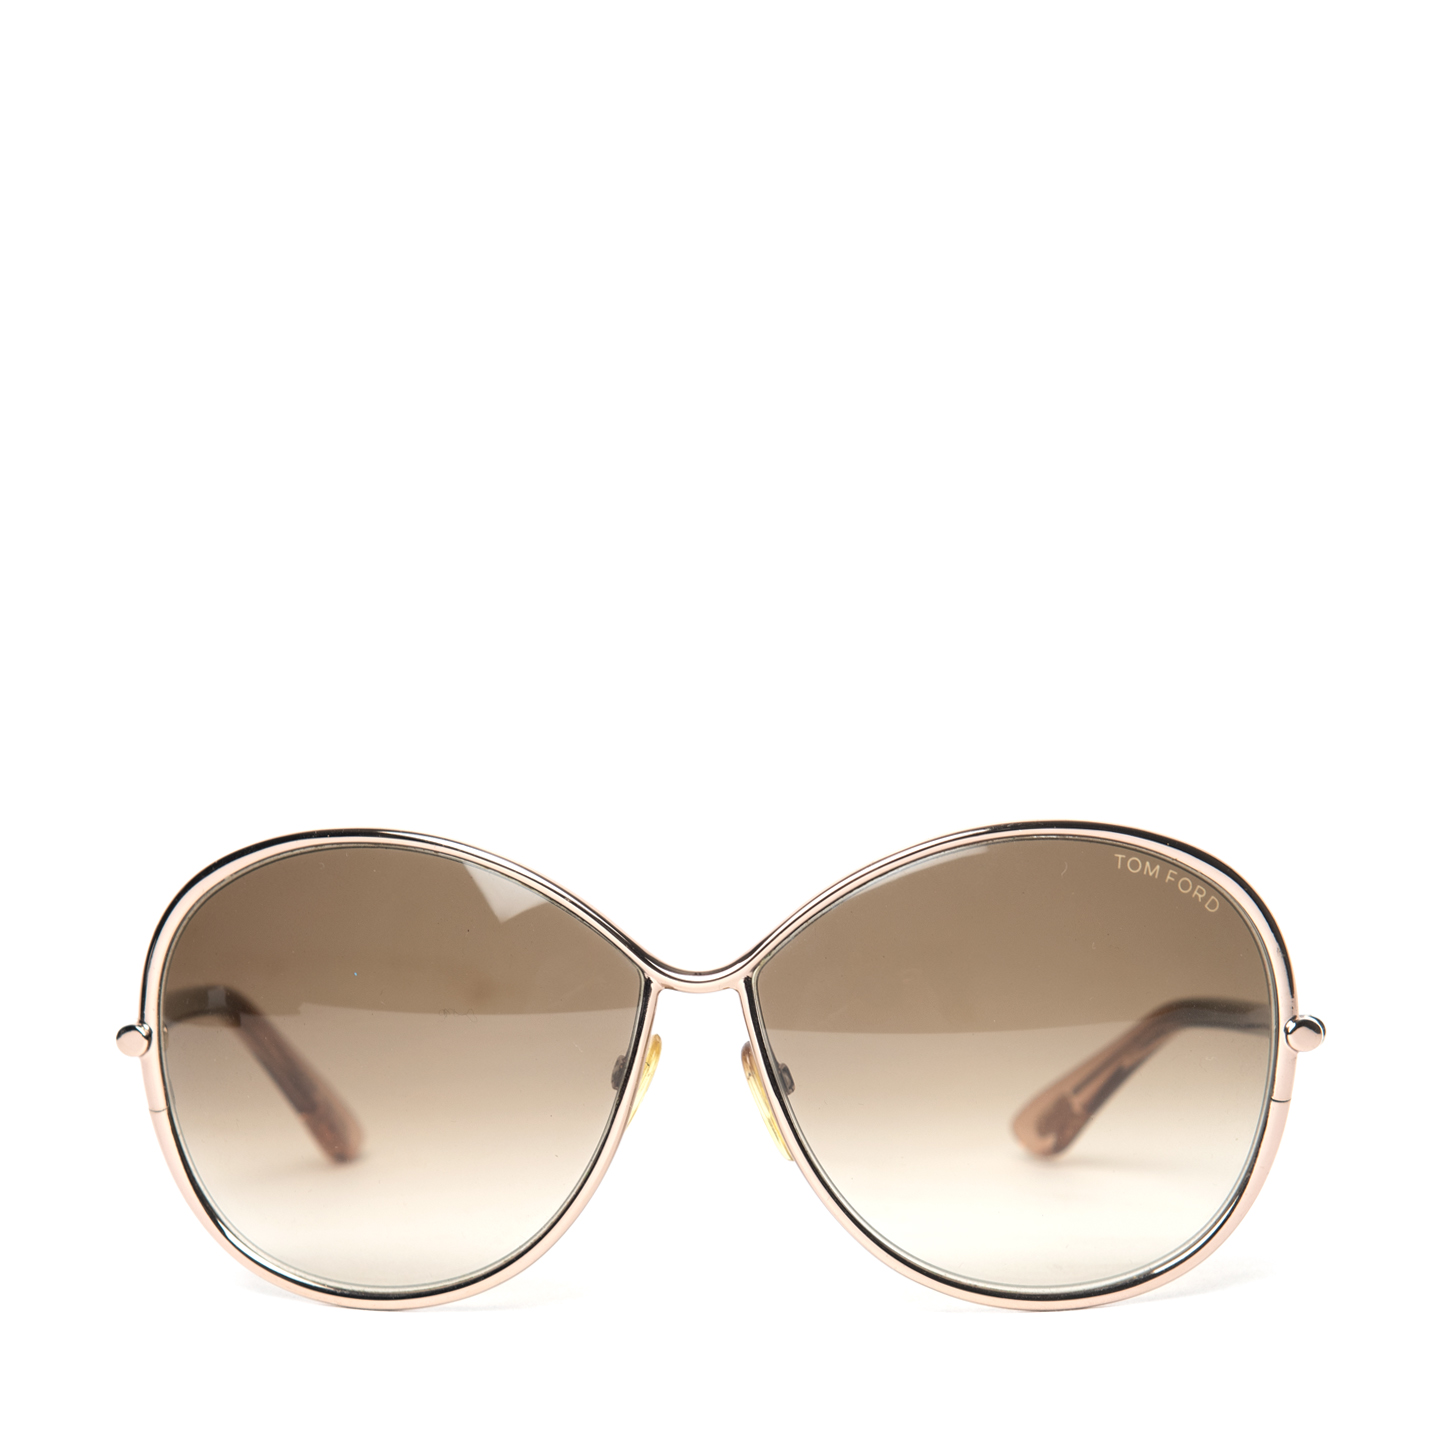 Tom Ford Iris TF180 Sunglasses, Gold - LabelCentric